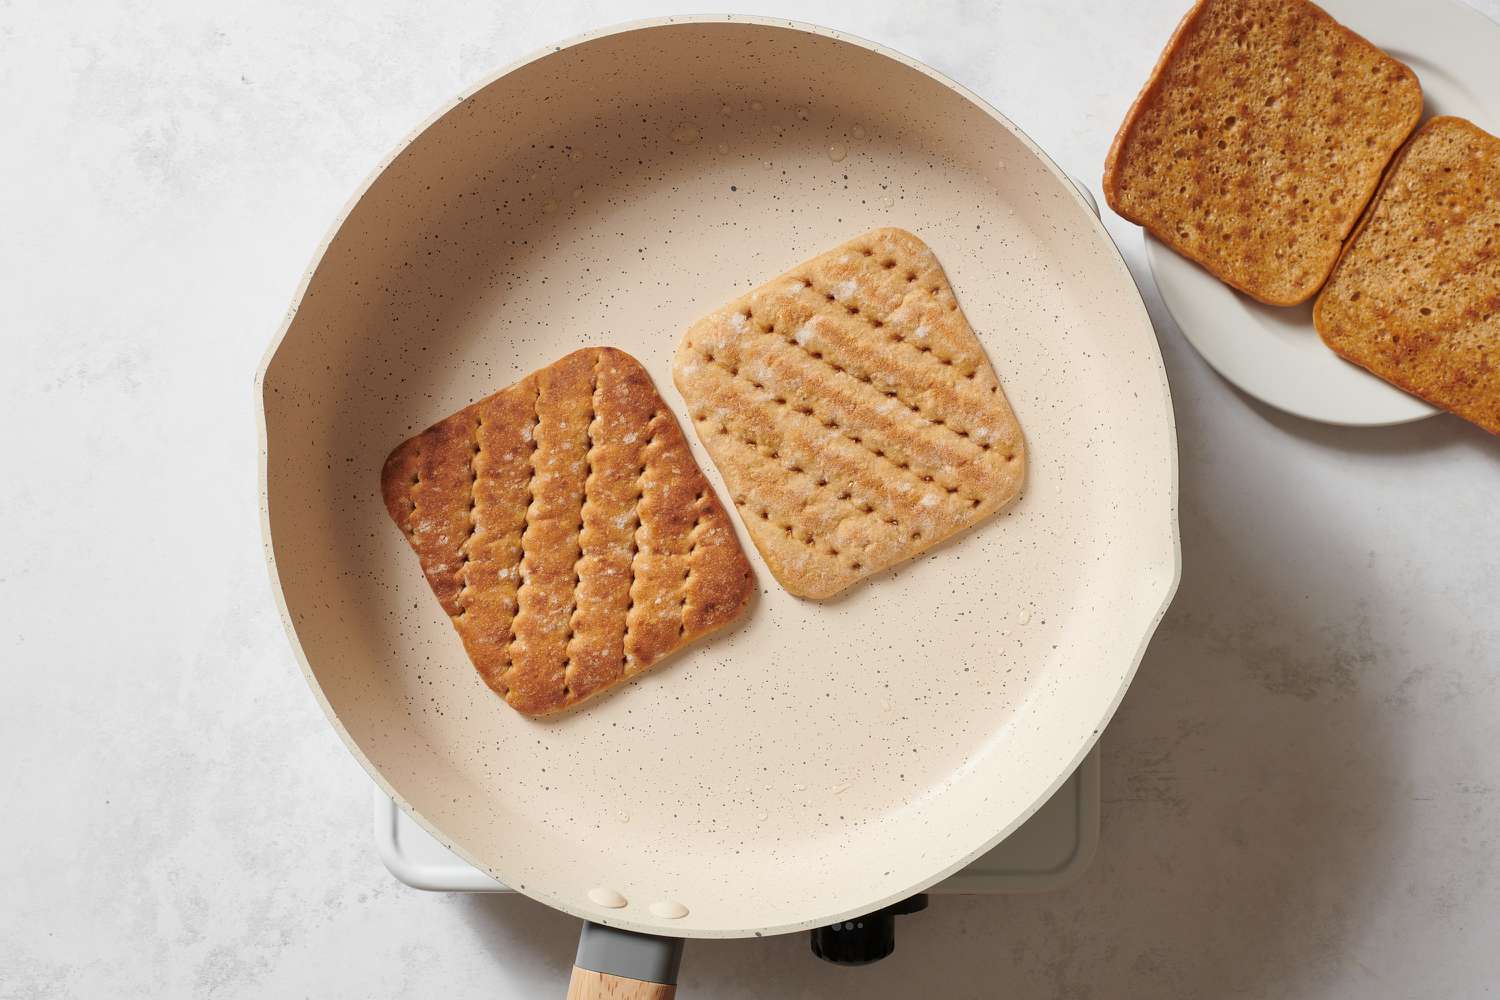 Two slices of bread toasting in a skillet